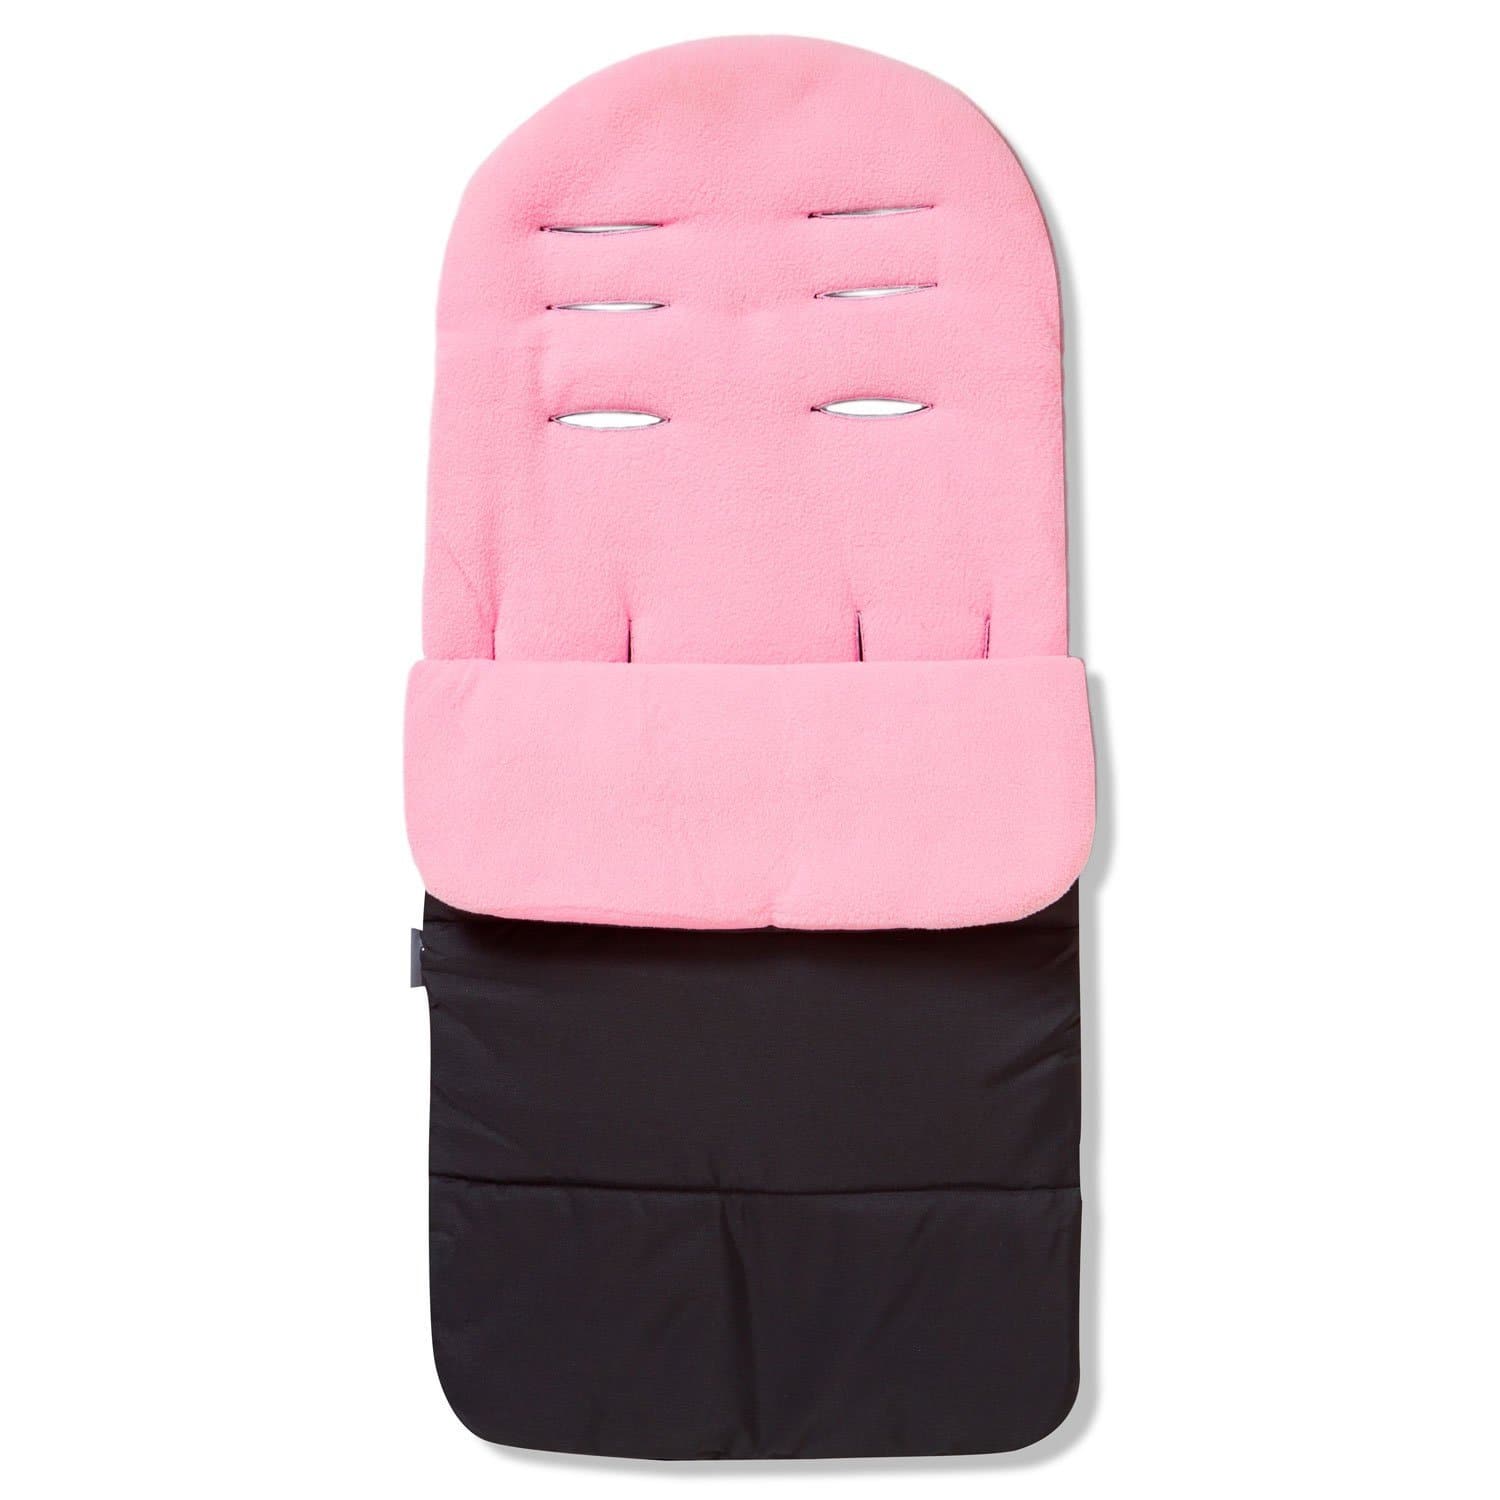 Premium Footmuff / Cosy Toes Compatible with Egg - Candy Pink / Fits All Models | For Your Little One